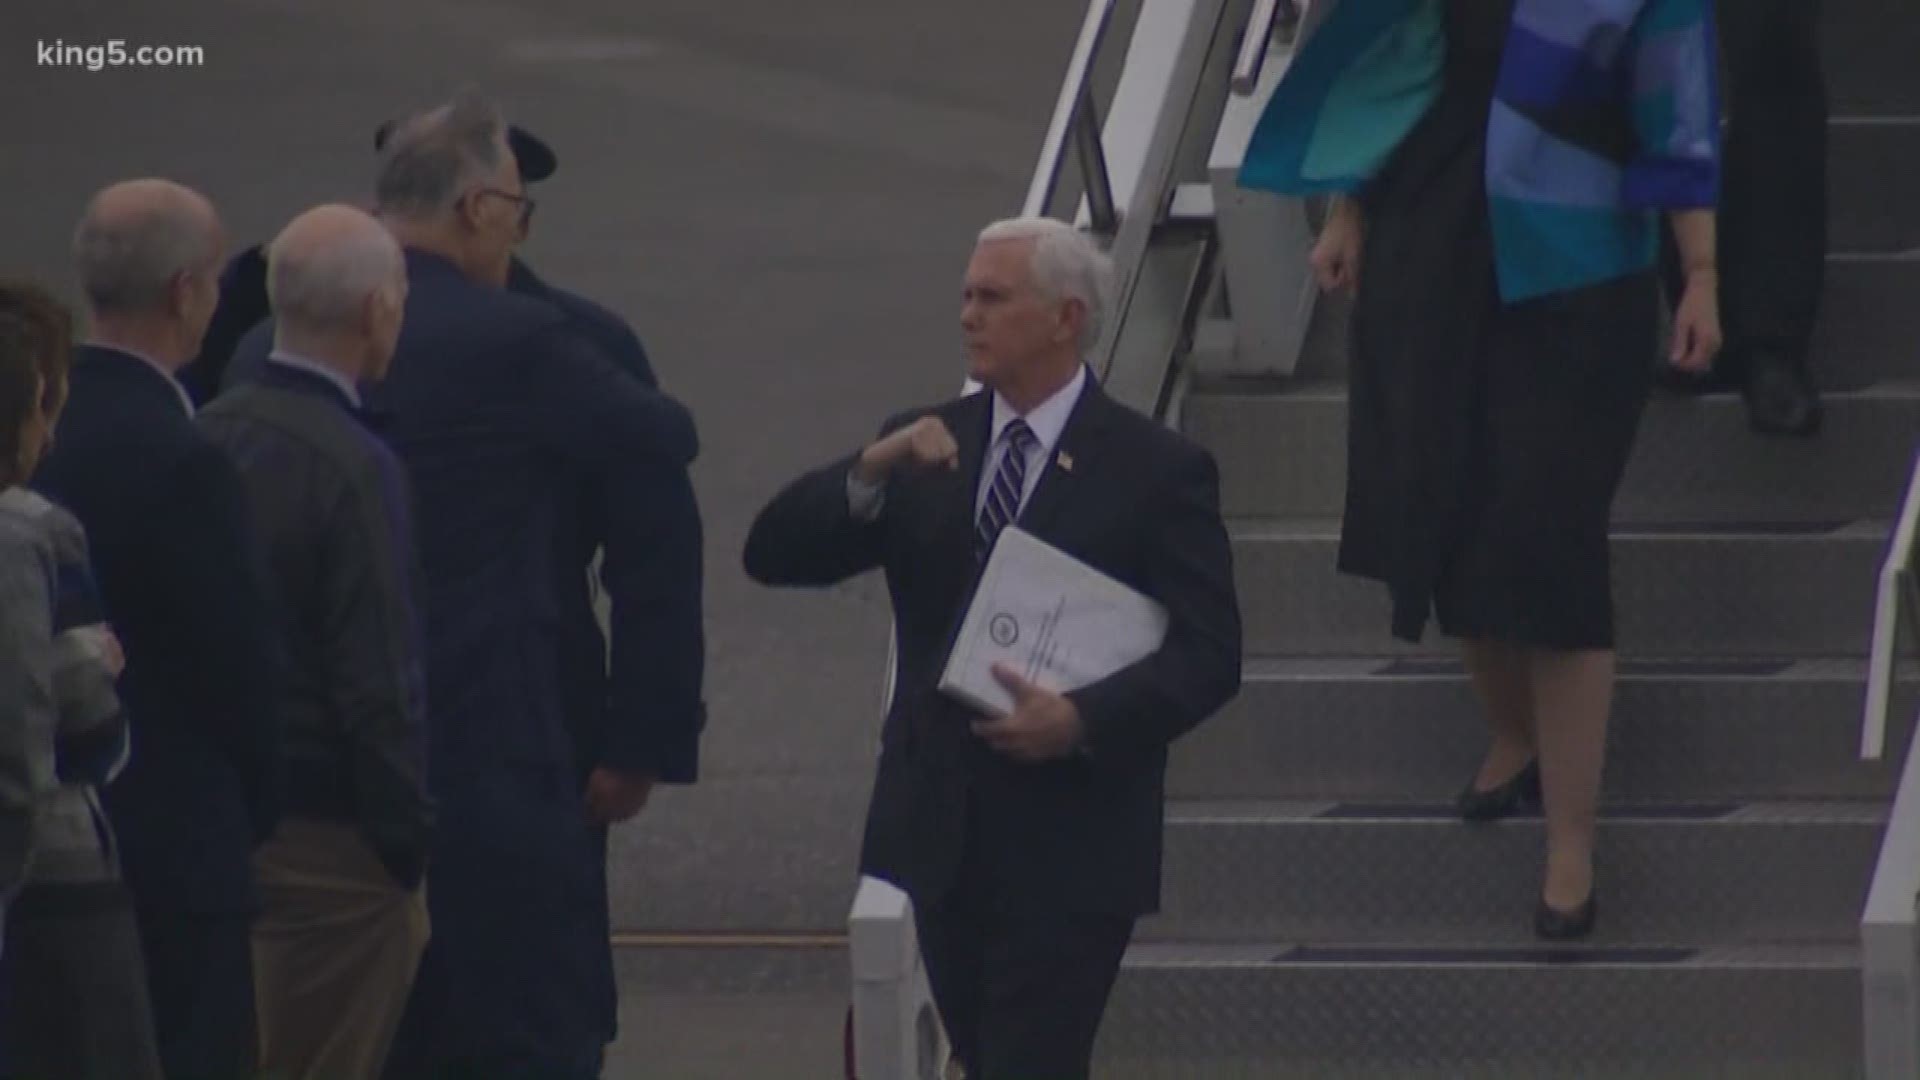 Vp Pence Bumps Elbows With Governor Inslee King5 Com